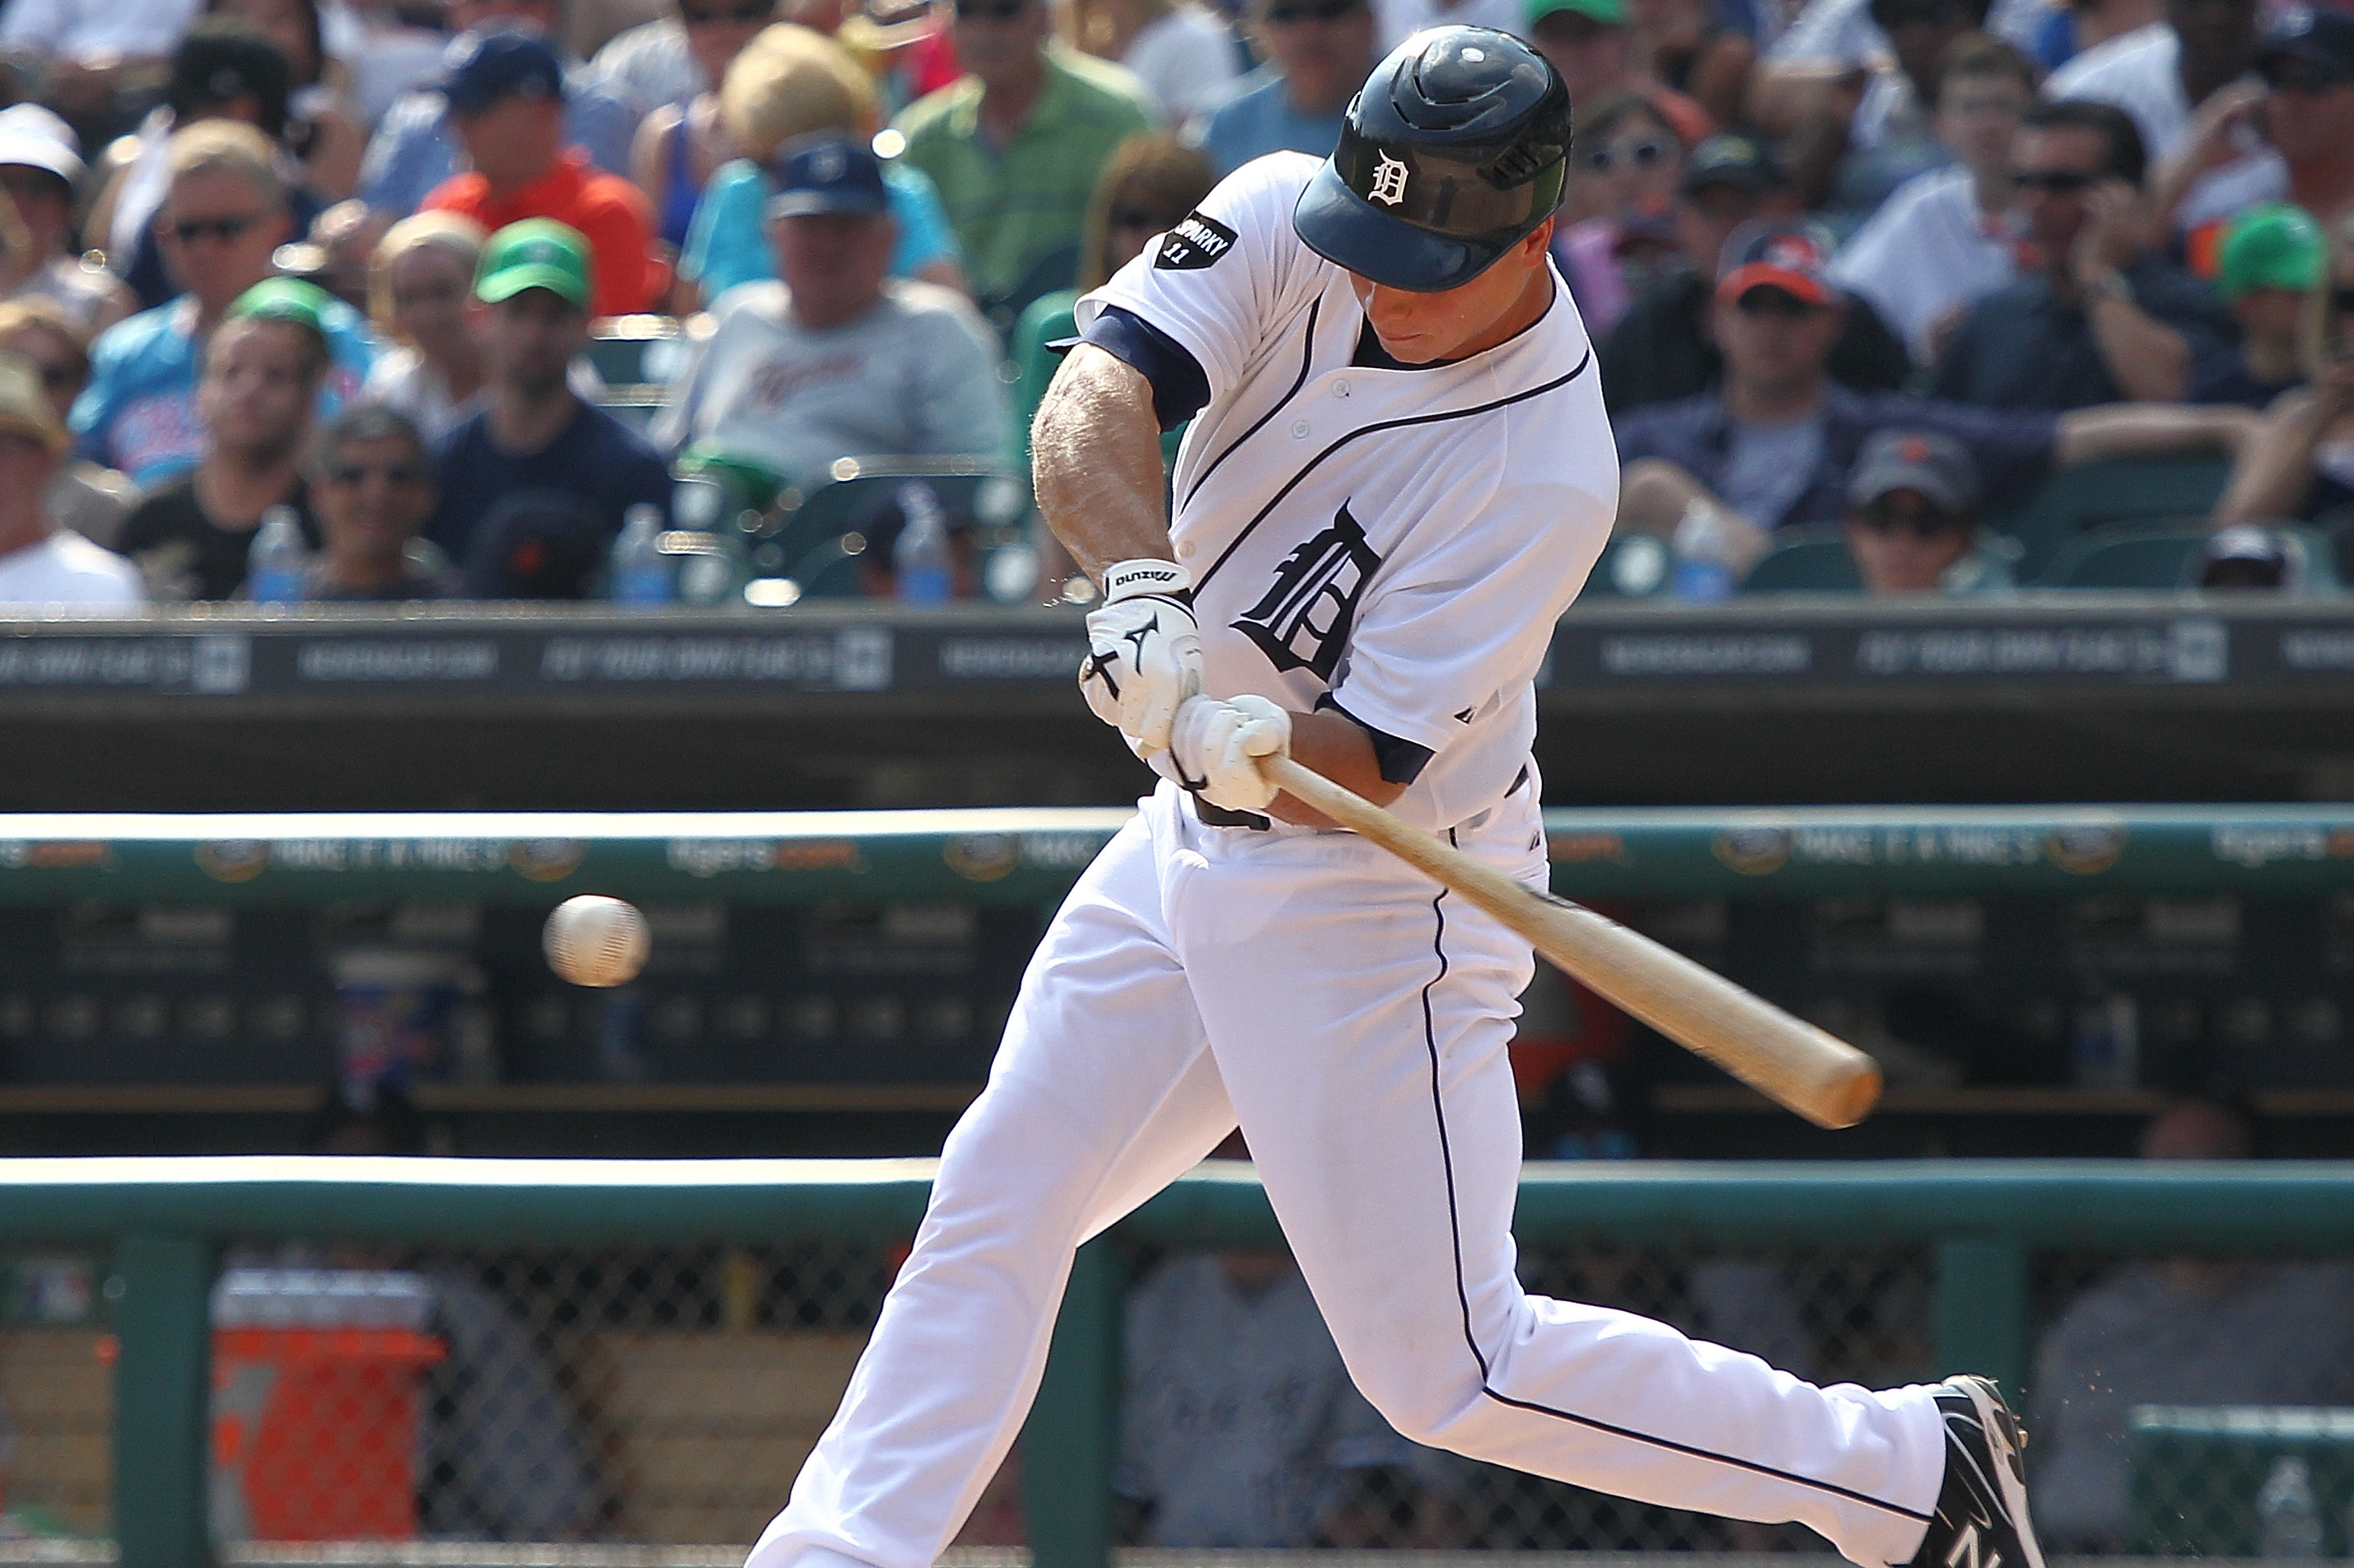 Is Andy Dirks the best outfielder in the American League? - Bless